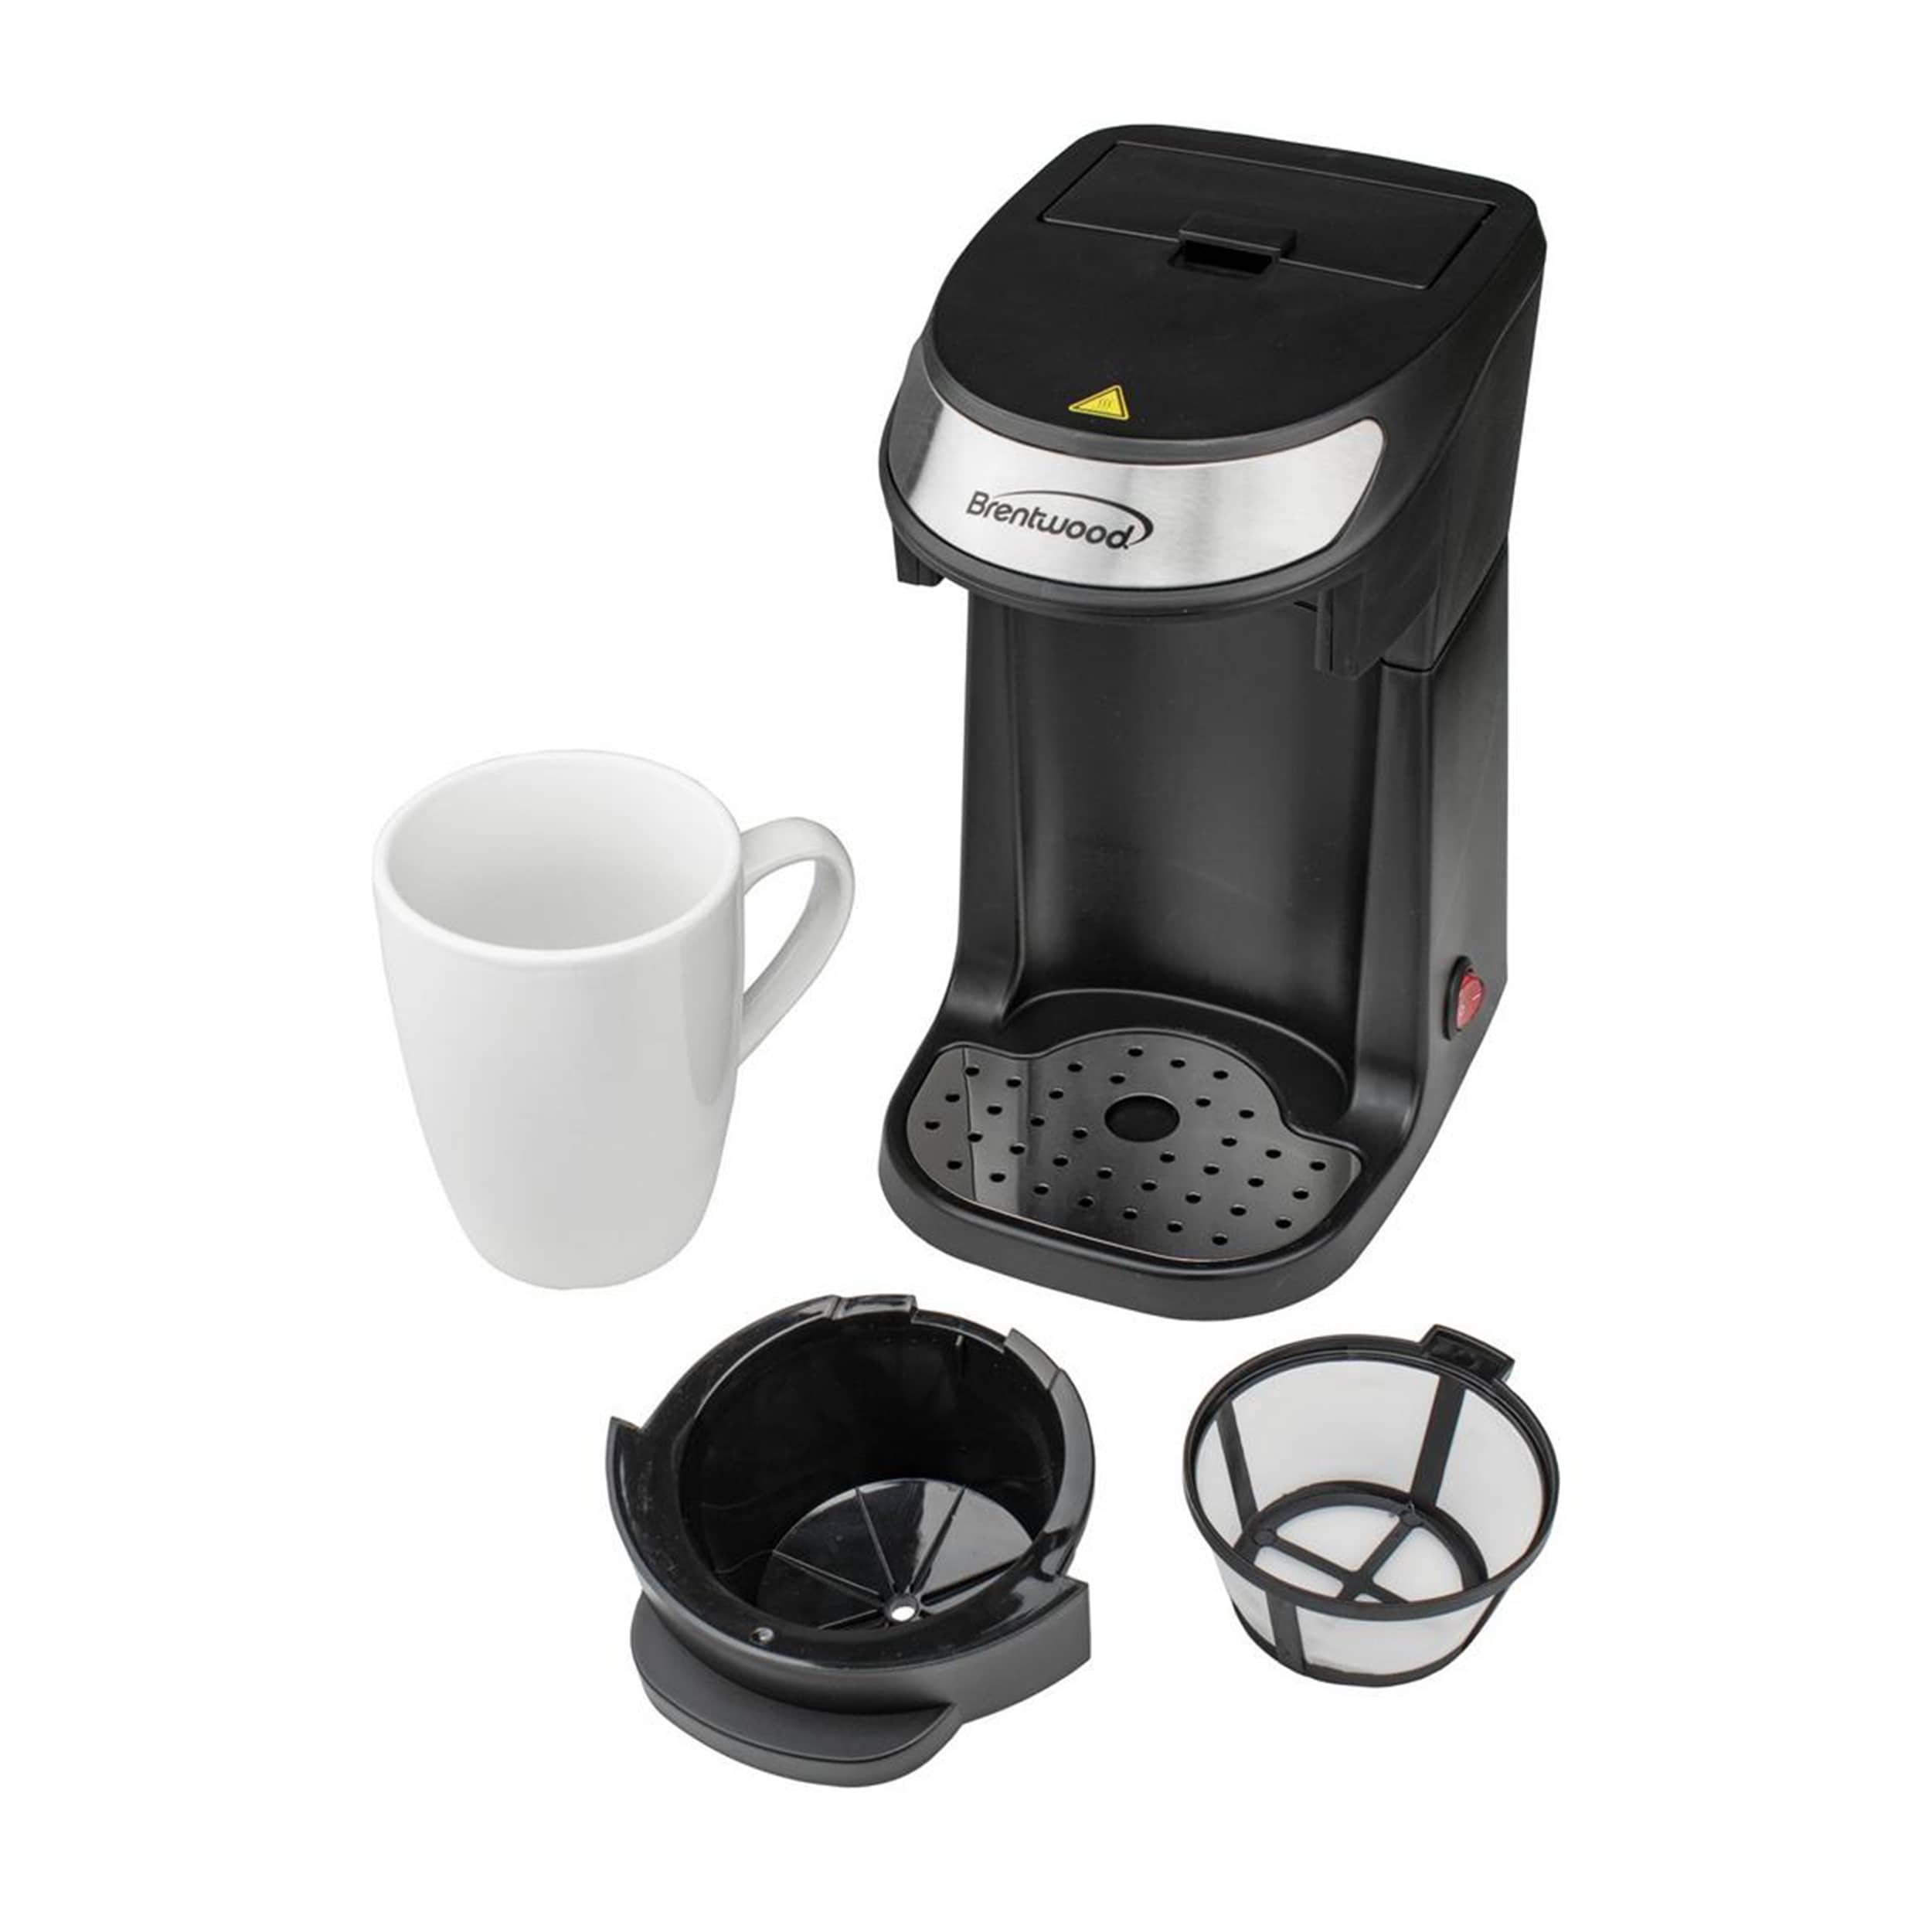 https://ak1.ostkcdn.com/images/products/is/images/direct/82a706a6ecc5b98ad3038953ea03ae89a7e78df2/Brentwood-Single-Serve-Coffee-Maker-in-Black-with-Mug.jpg